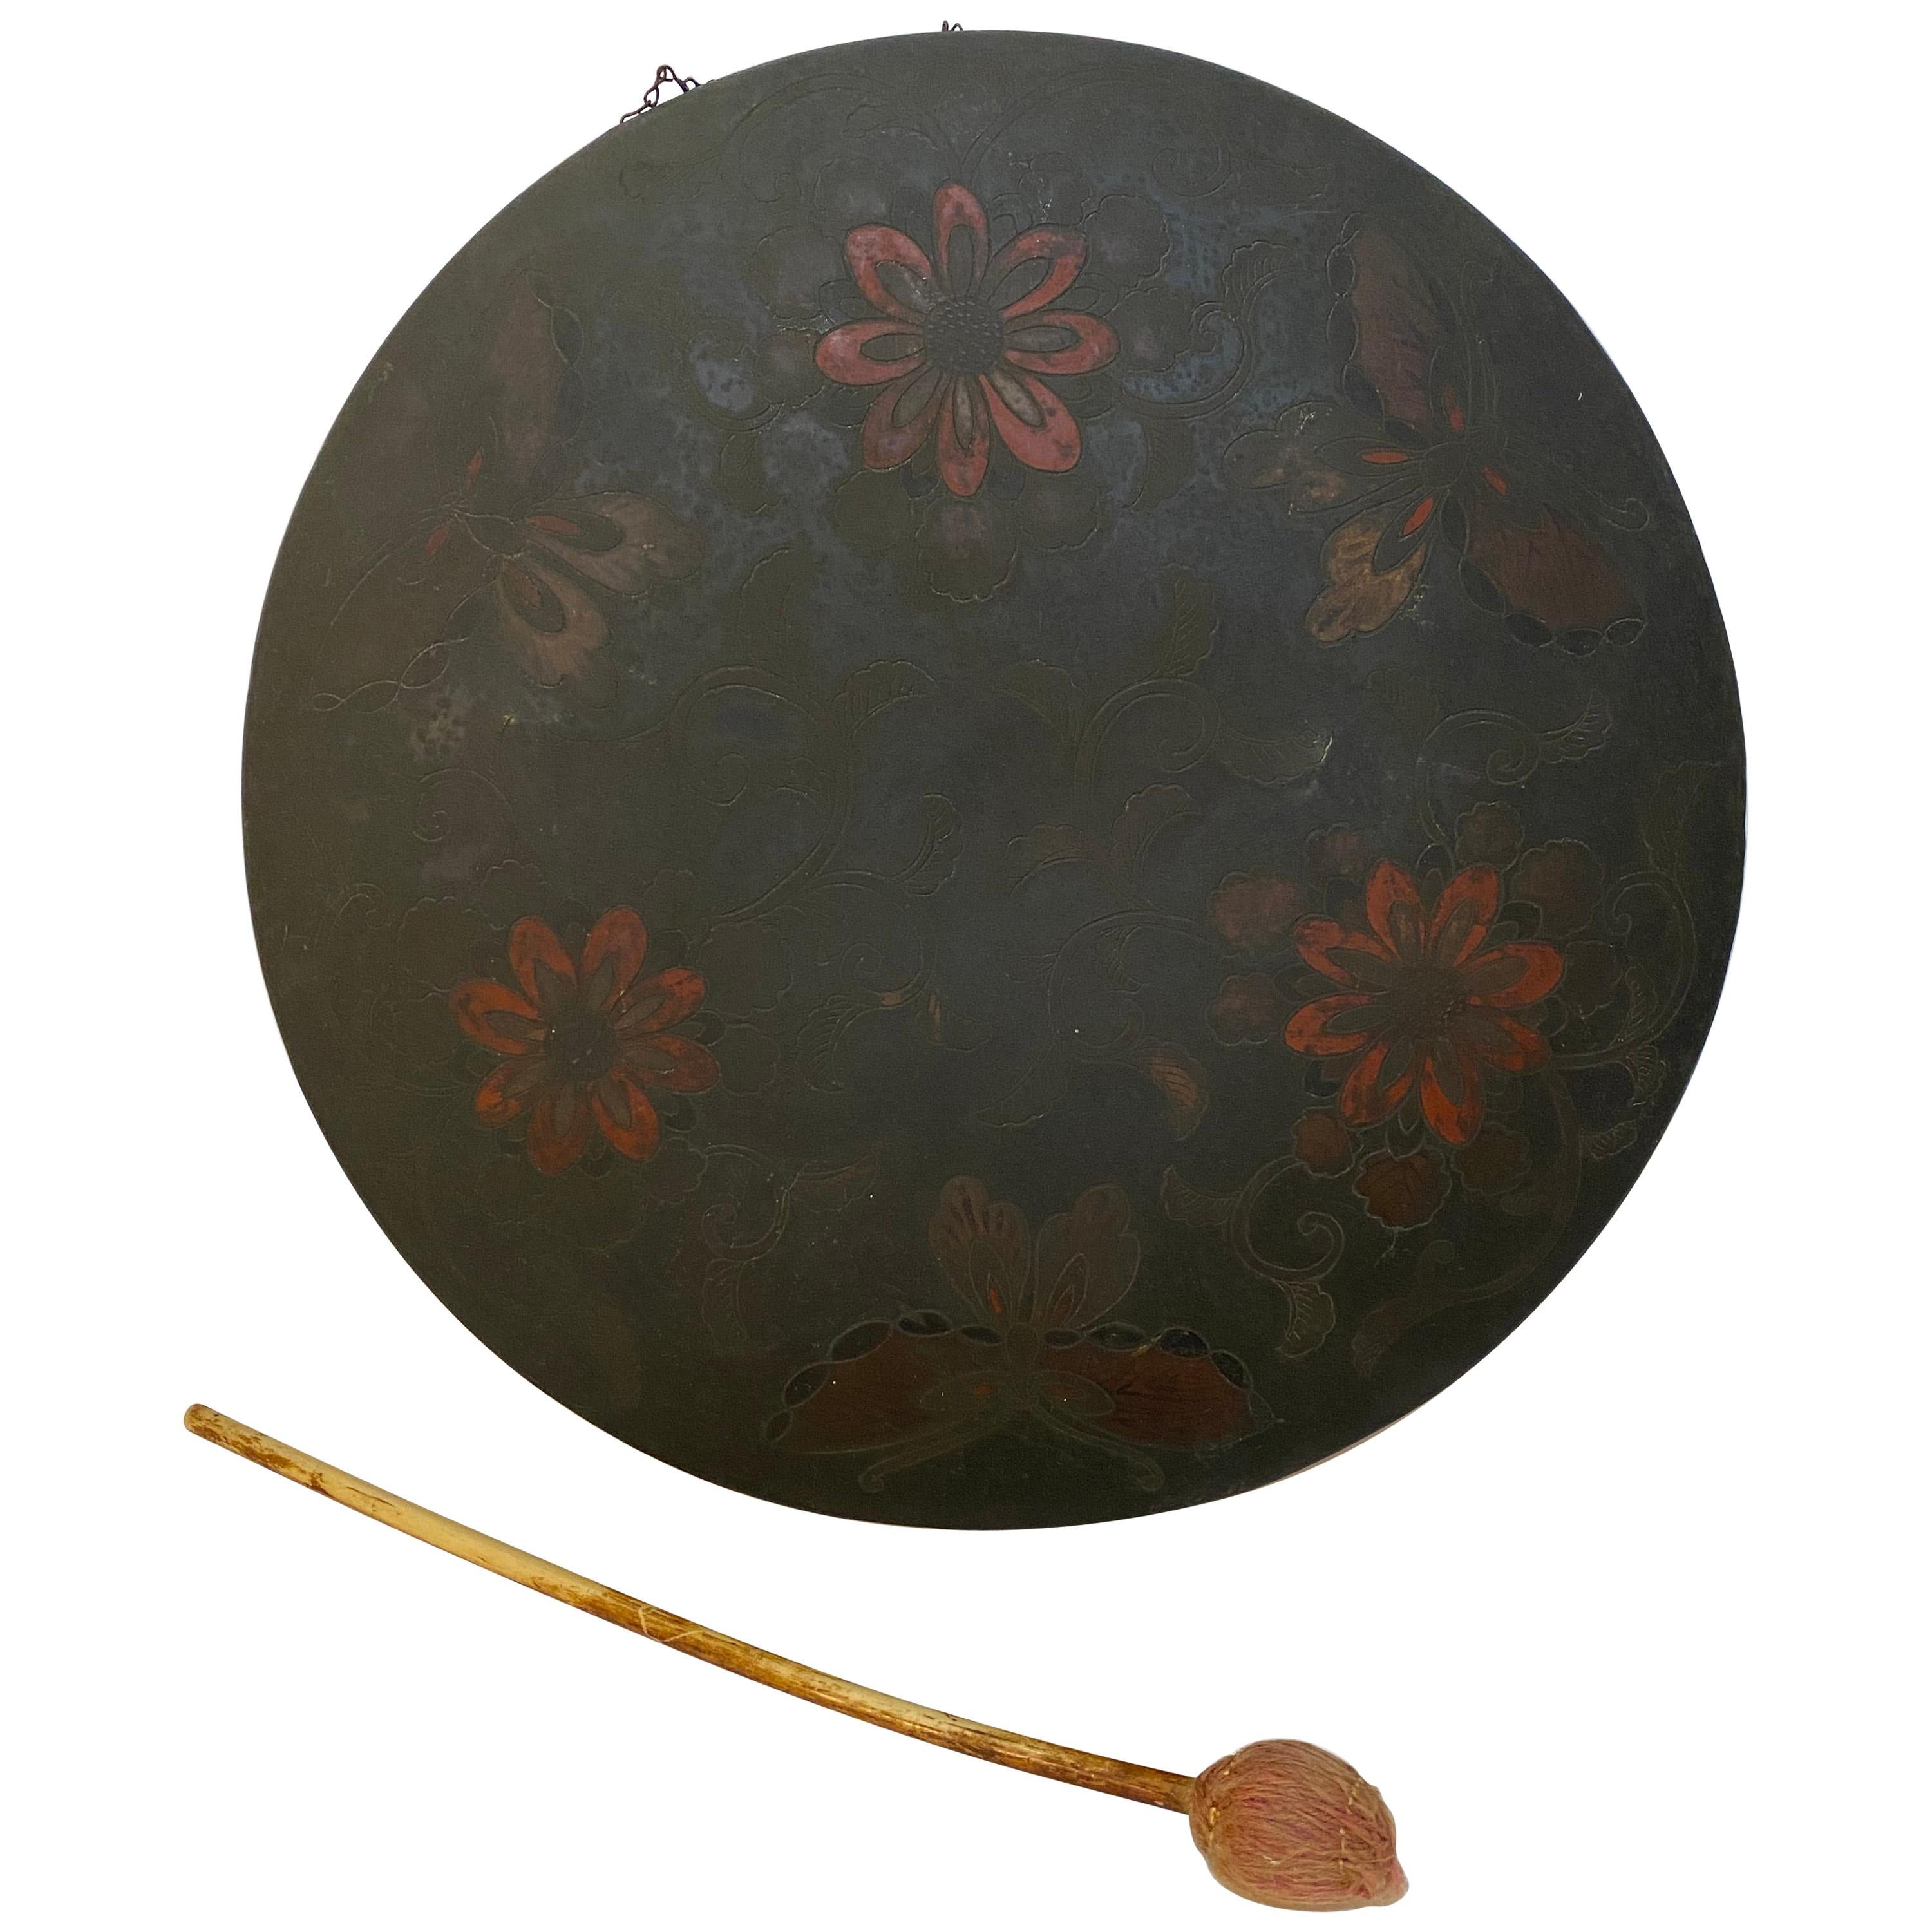 Japanese Butterfly and Floral Enameled Brass Gong